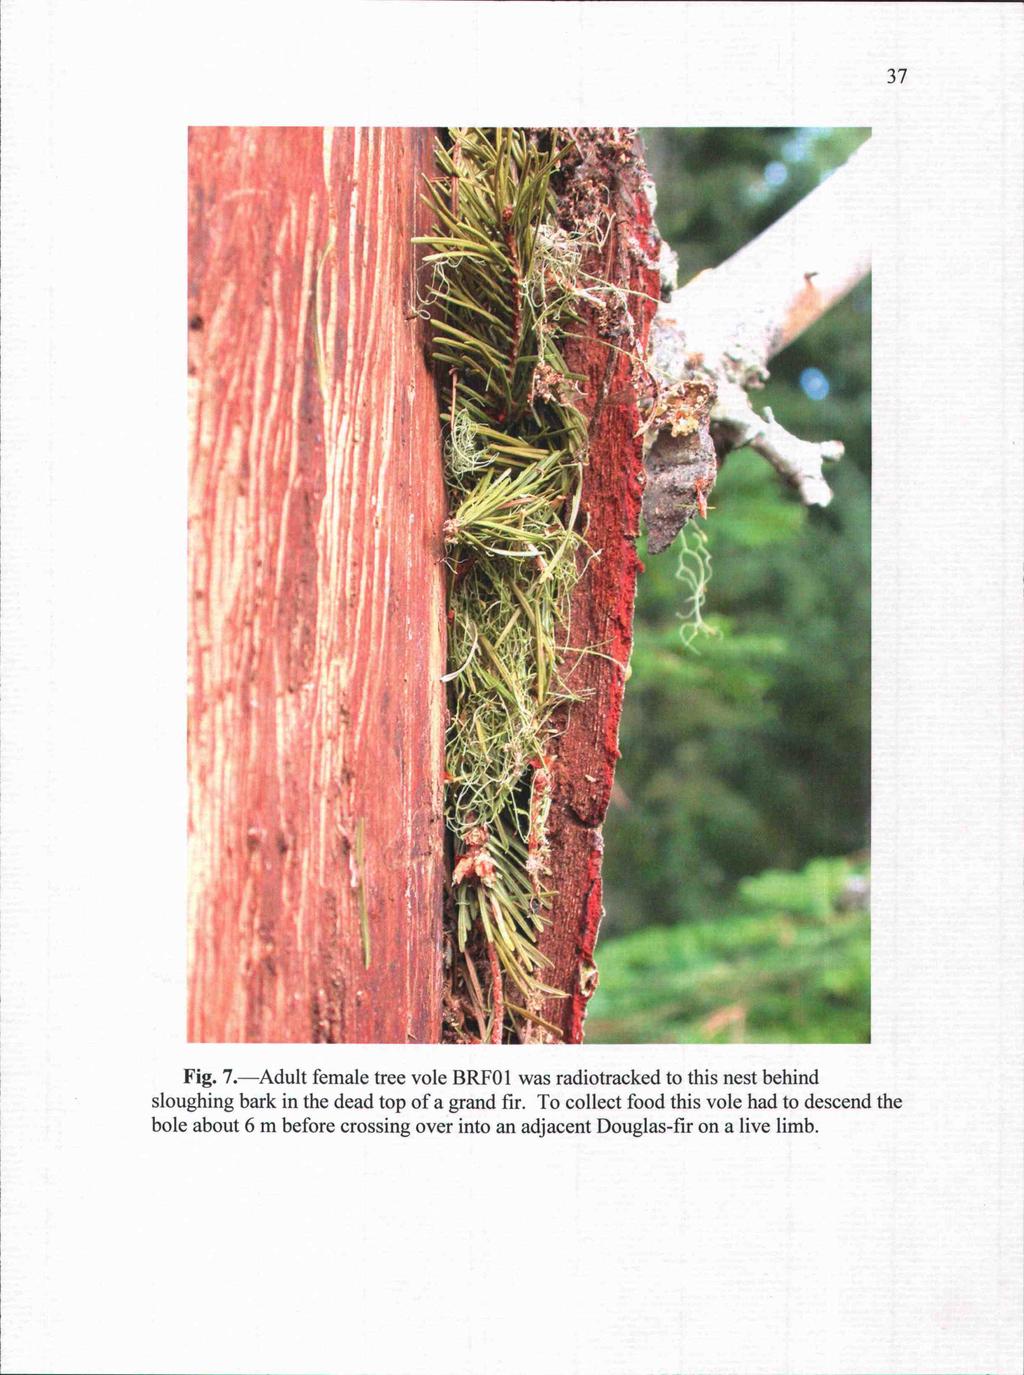 Fig. 7.Adult female tree vole BRFO 1 was radiotracked to this nest behind sloughing bark in the dead top of a grand fir.